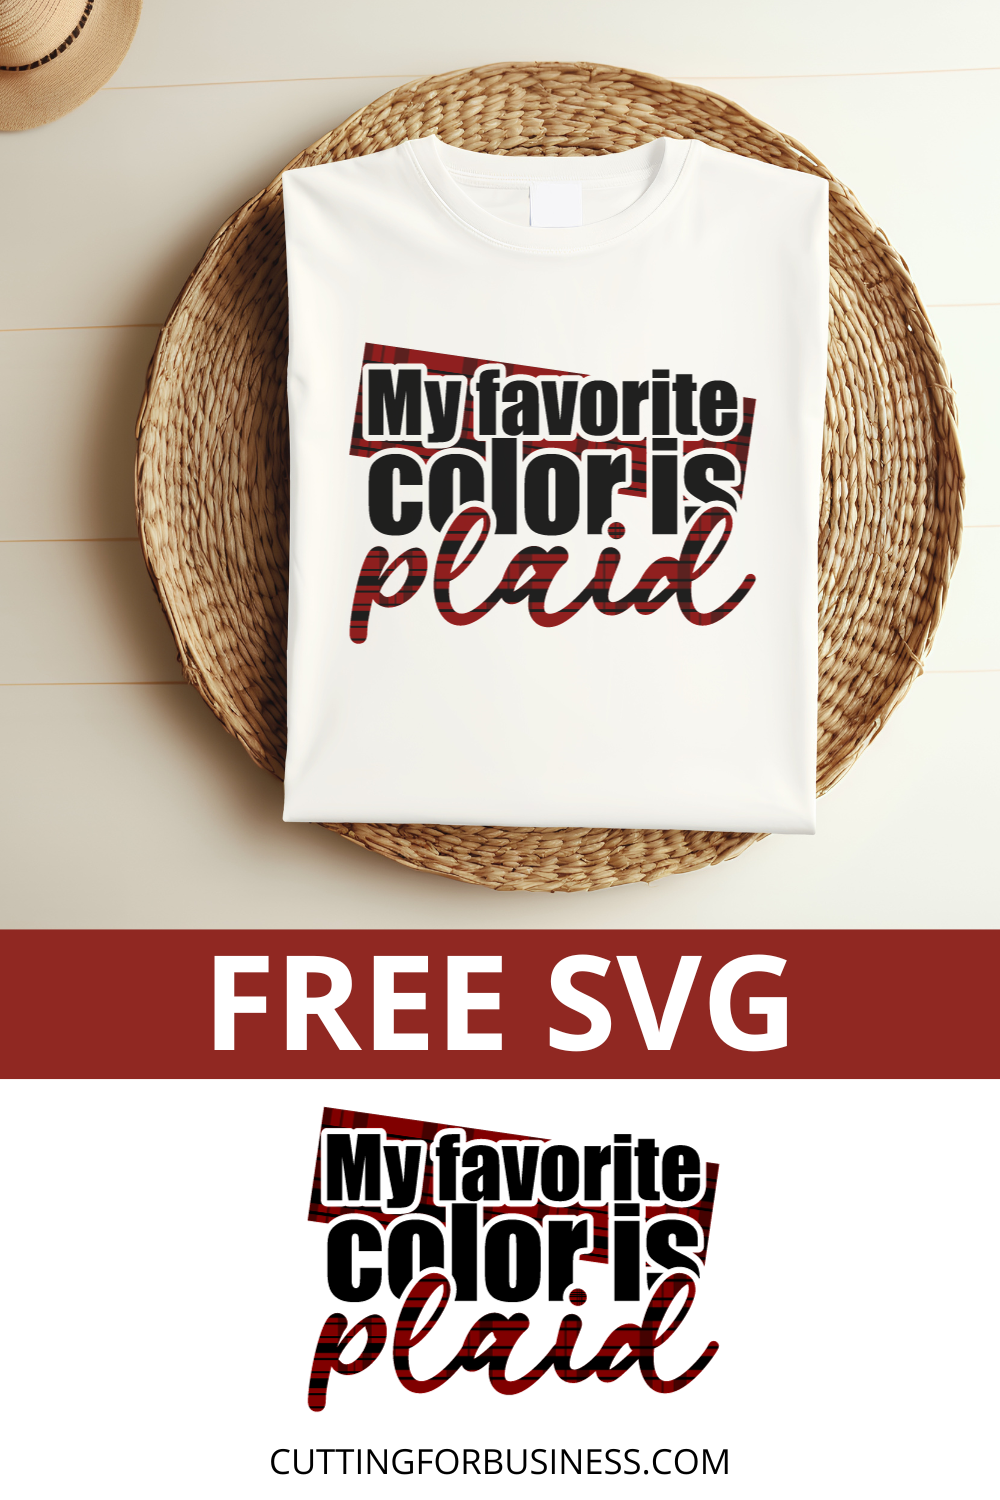 Free My Favorite Color is Plaid SVG - cuttingforbusiness.com